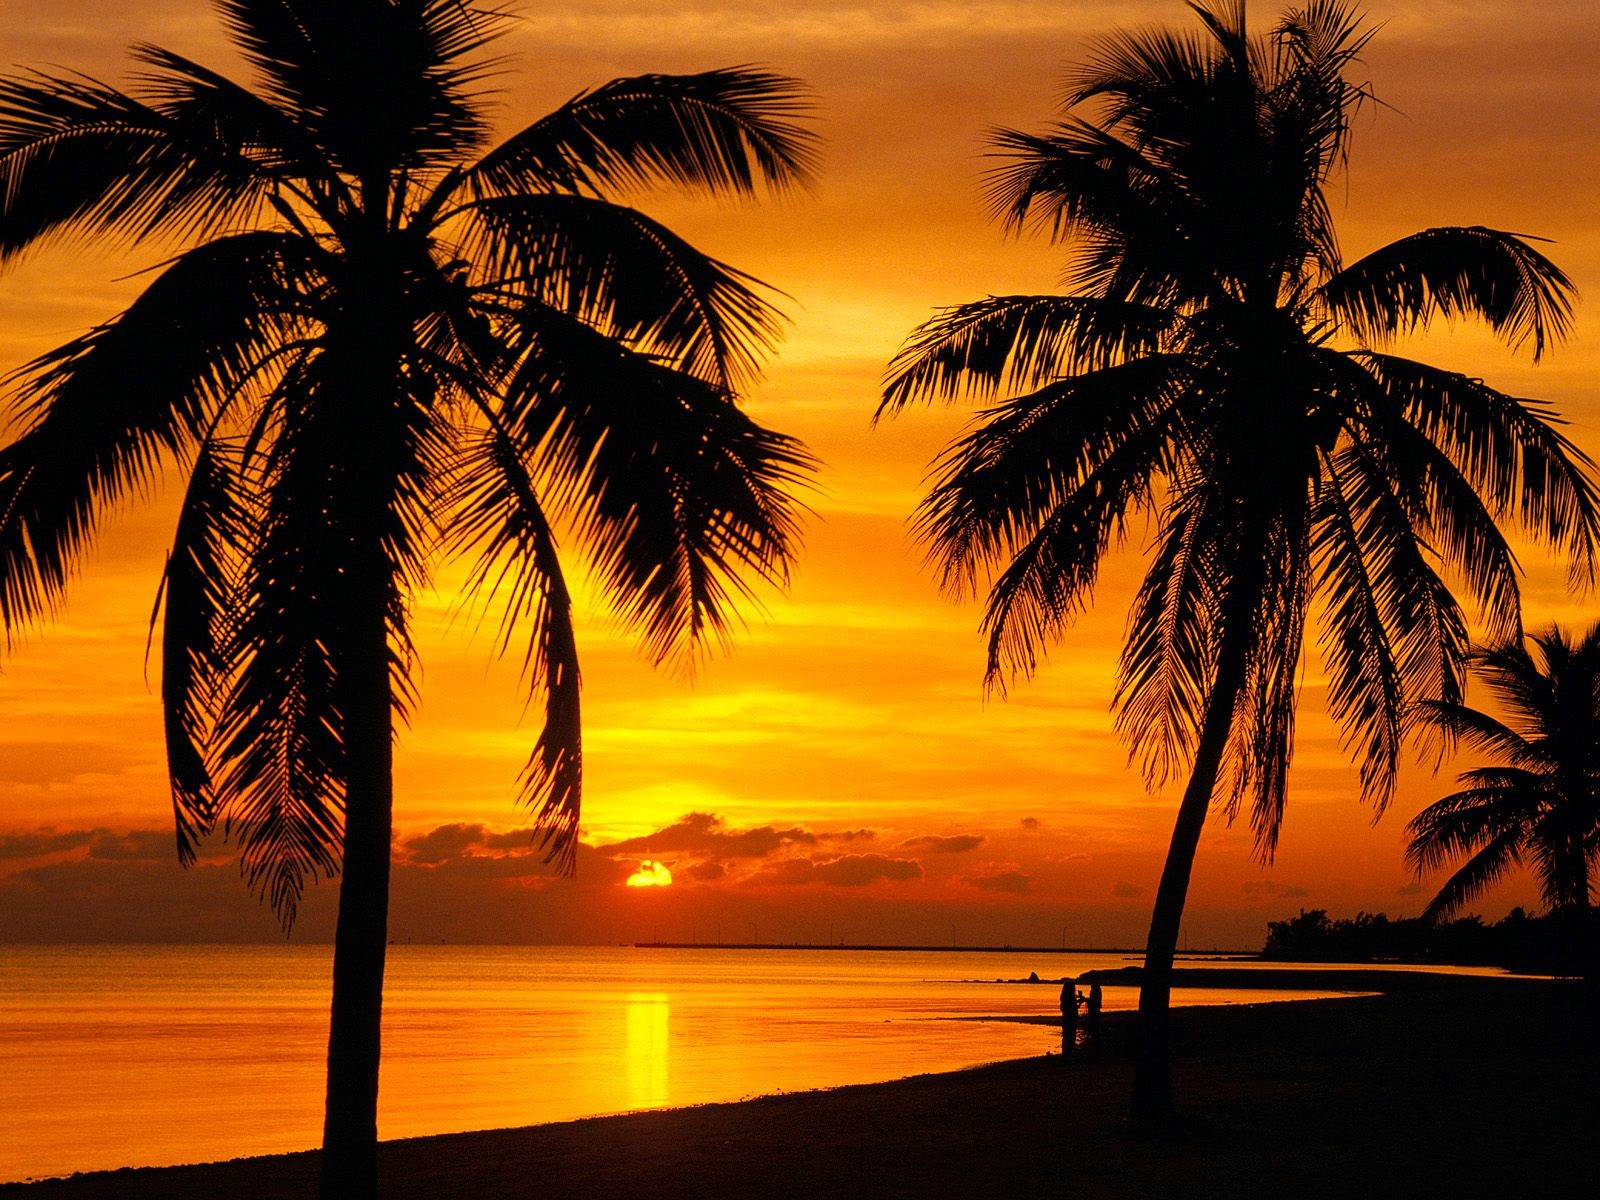 General 1600x1200 landscape palm trees sunset silhouette tropical skyscape